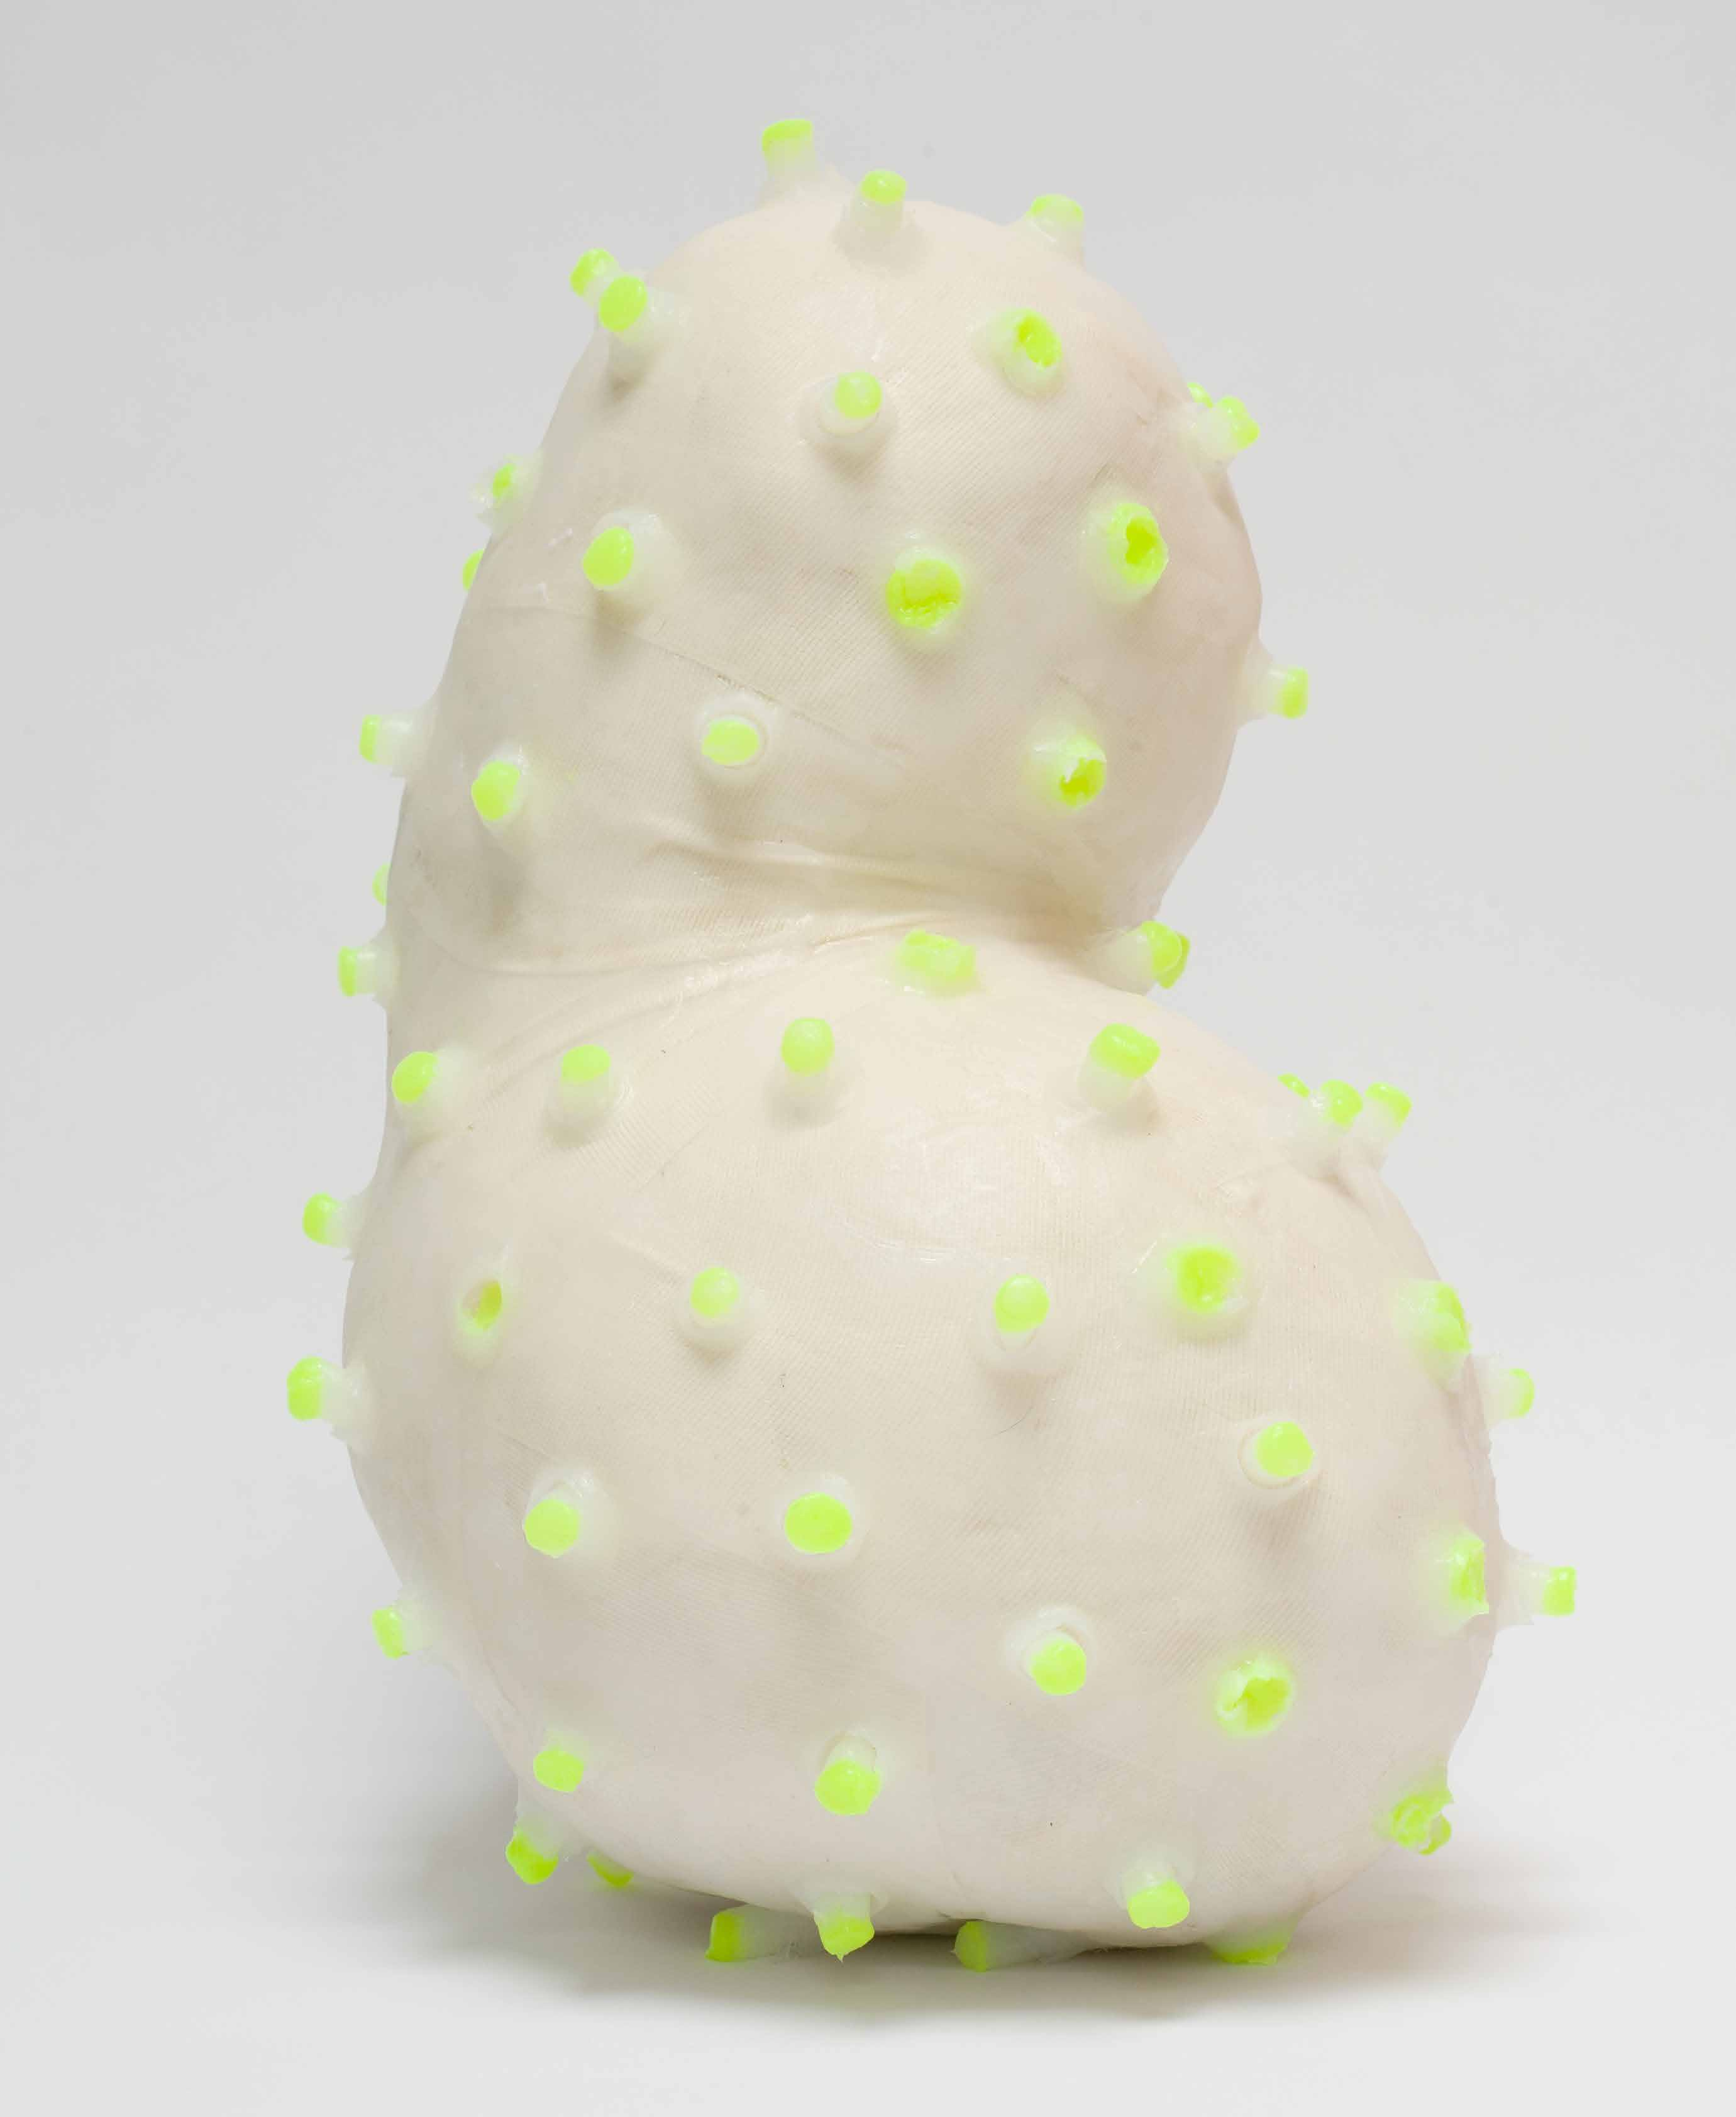 16 Lab Sweets (Small Beasts #13) 2014 Silikon, fluoreszierende